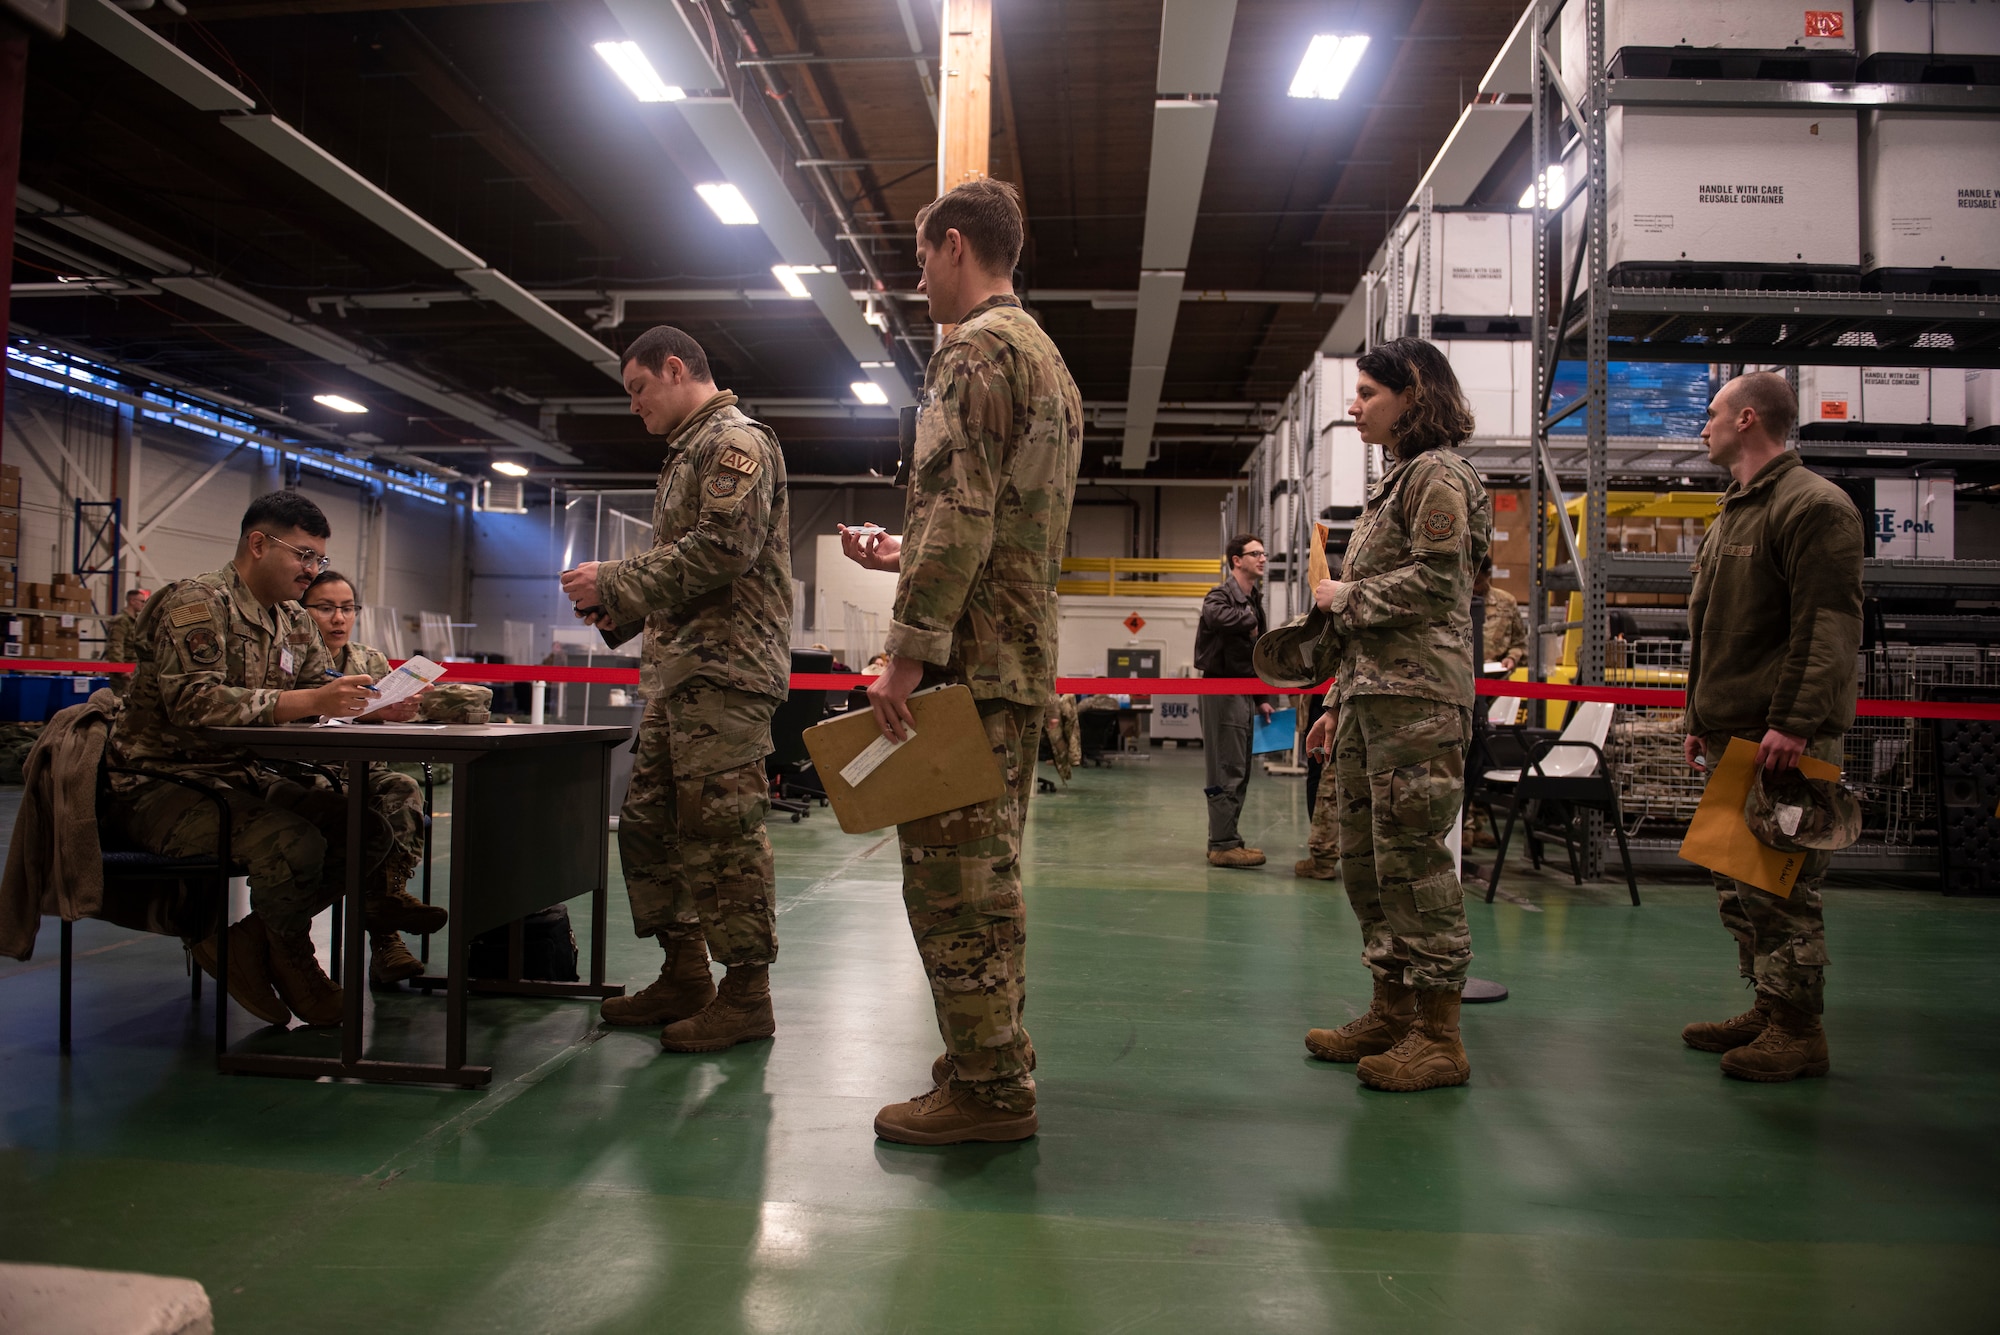 U.S. Air Force Airmen check in with Installation Personnel Readiness for the deployment line as part of Exercise Rainier War 22A at Joint Base Lewis-McChord, Washington, March 15, 2022. Rainier War 22A exercised and evaluated the wing’s ability to employ the force and its  ability to perform during wartime and/or contingency taskings in a high-intensity, wartime contested, degraded and operationally limited environment while supporting the contingency operations against a near-peer adversary. (U.S. Air Force photo by Master Sgt. Julius Delos Reyes)